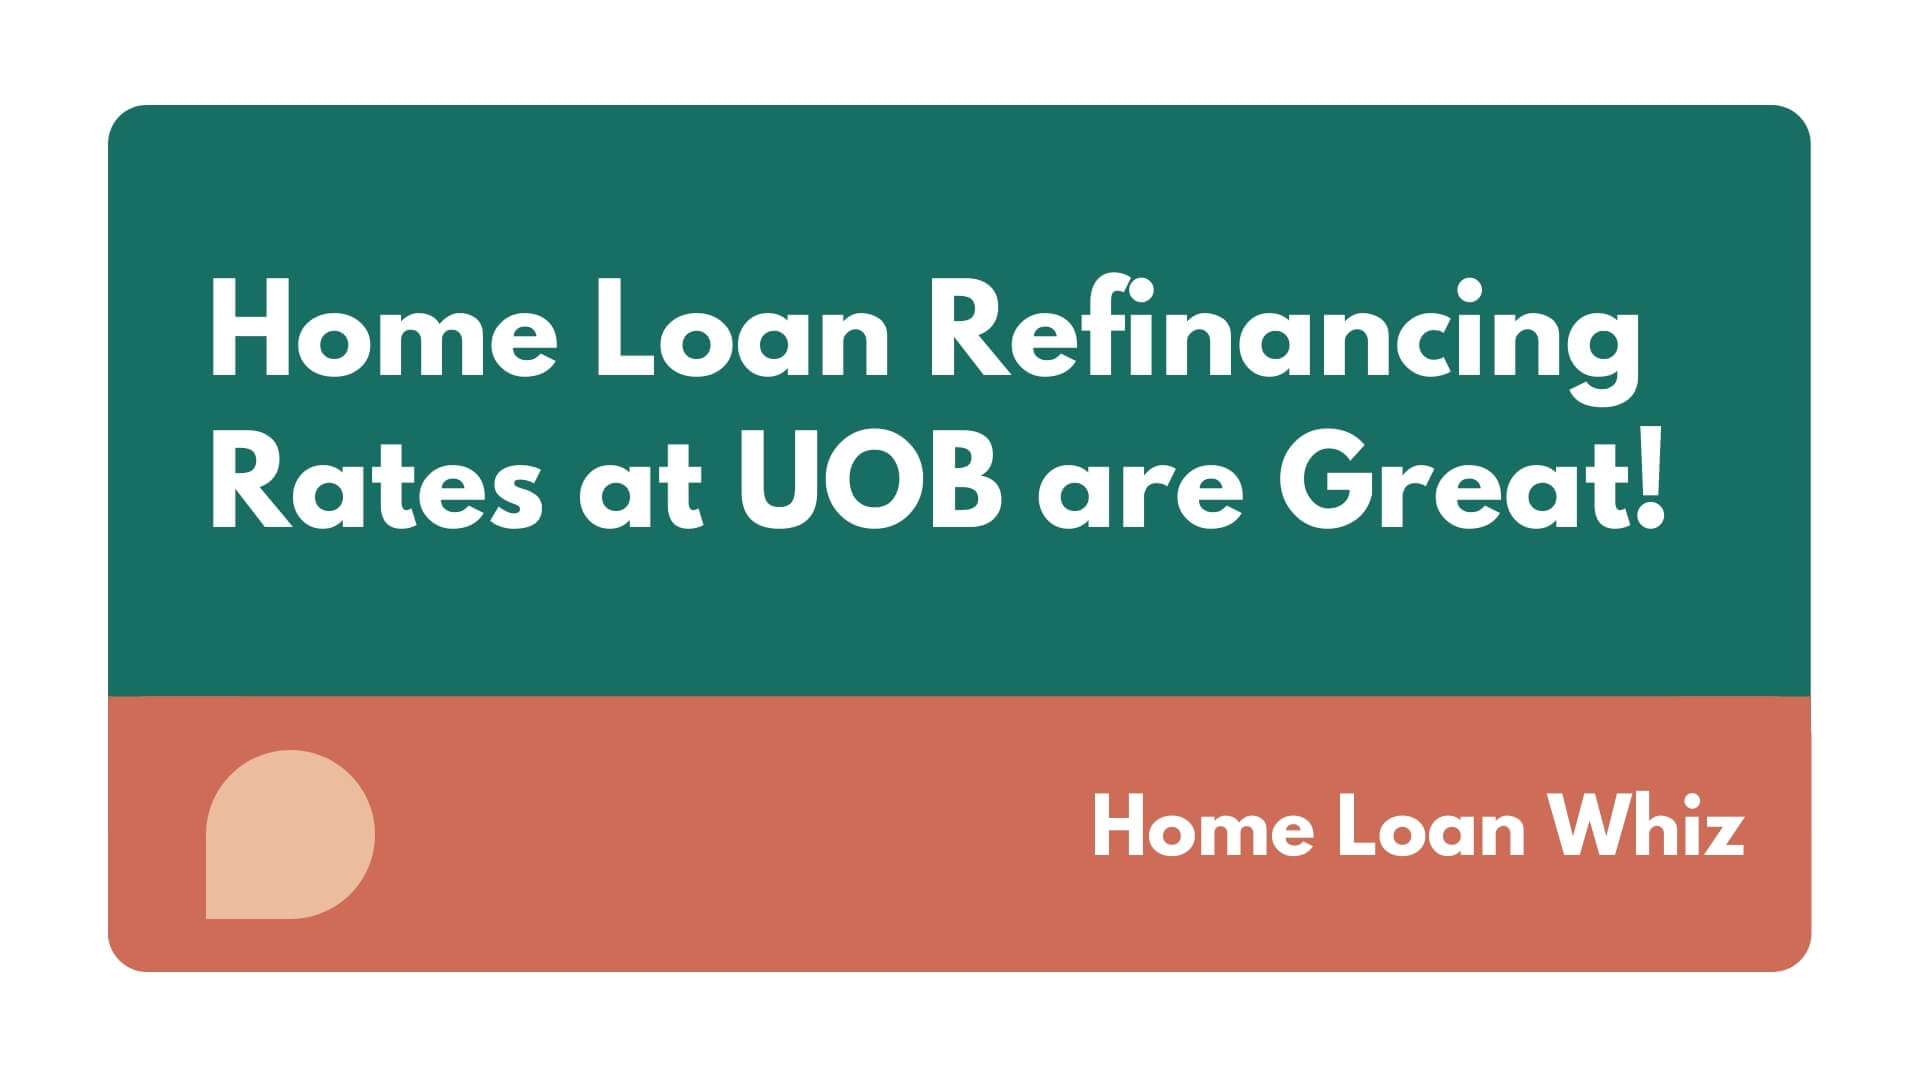 Home Loan Refinancing Rates at UOB are Great!